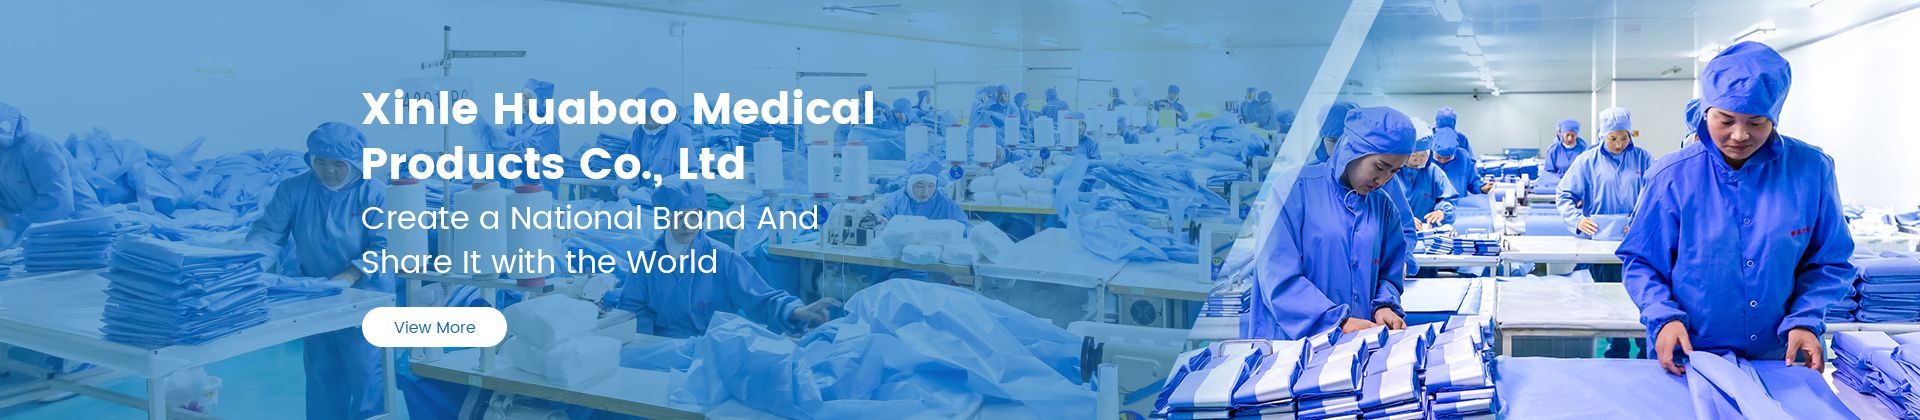 Xinle Huabao Medical Products Co., Ltd.